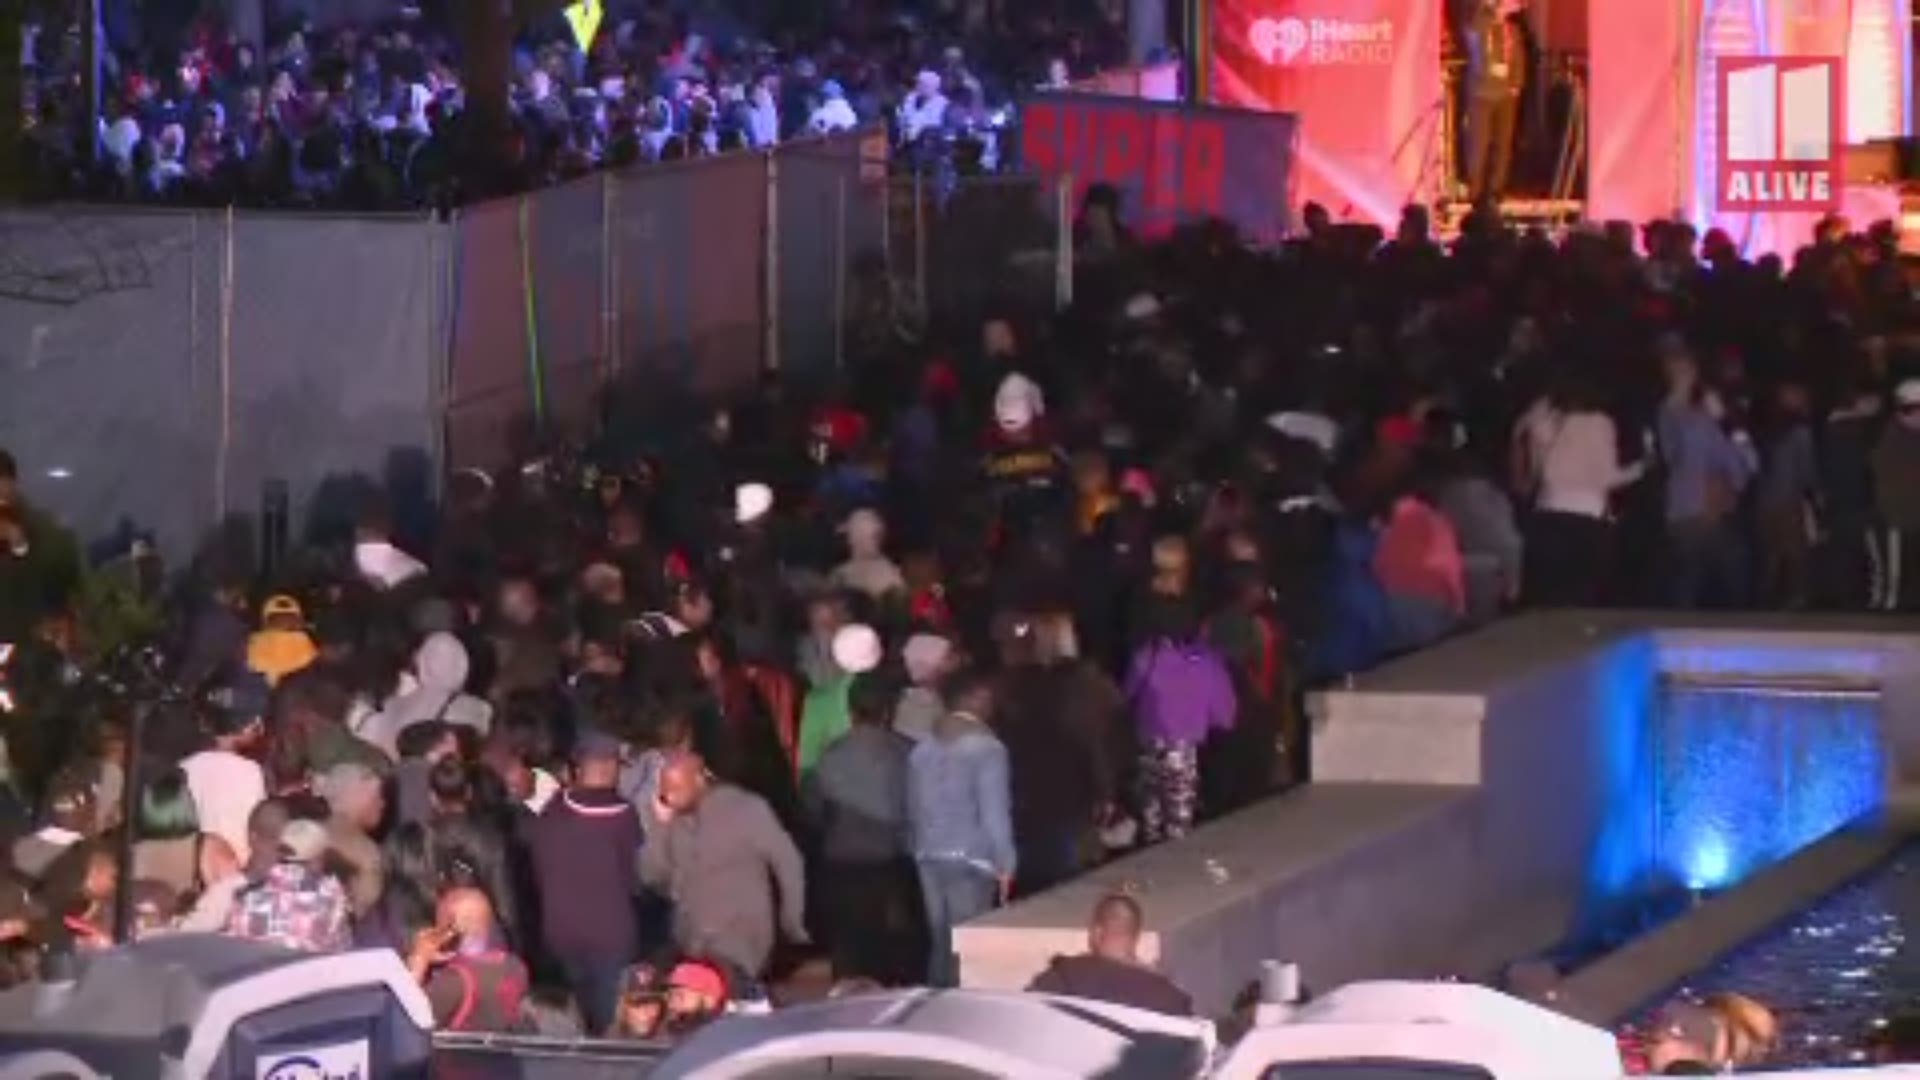 Crowds at Centennial Olympic Park reached capacity before 8:30 p.m. on the Saturday before the Super Bowl.